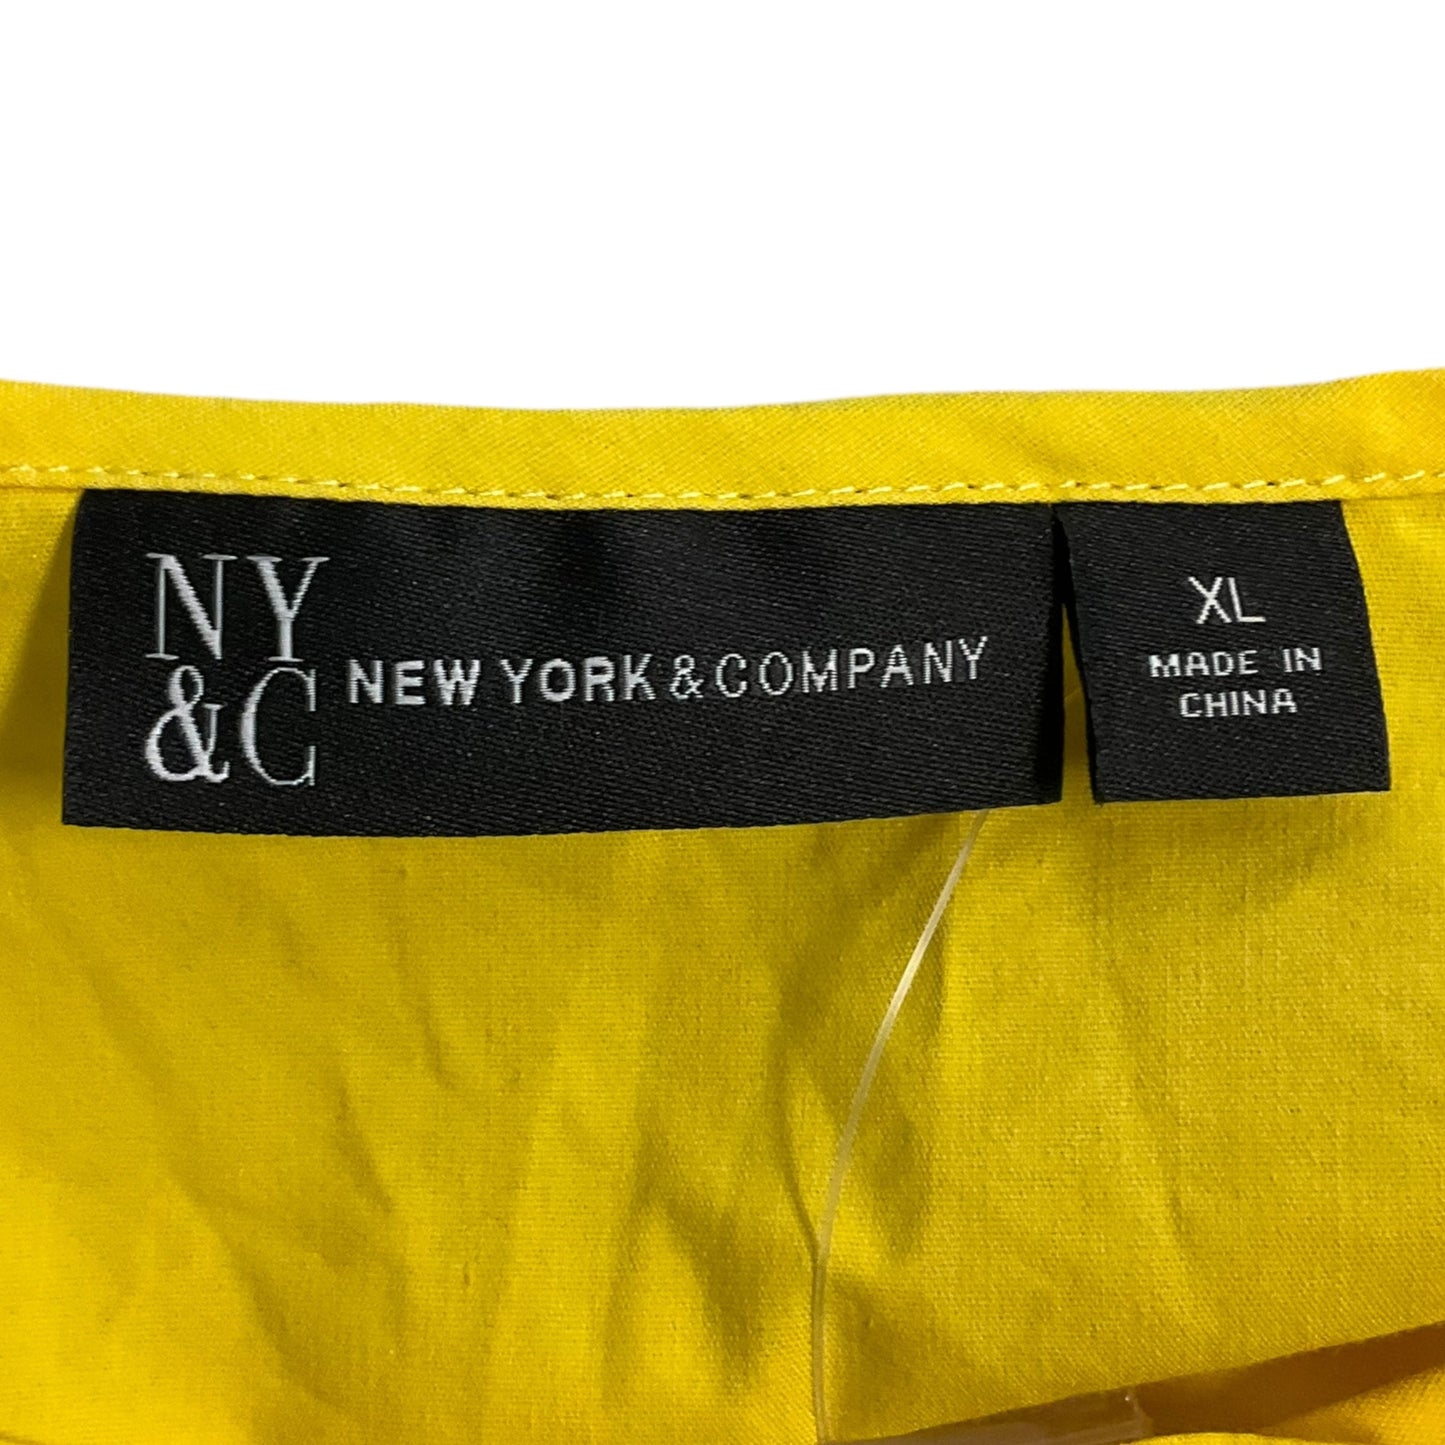 Yellow Top Long Sleeve New York And Co, Size Xl